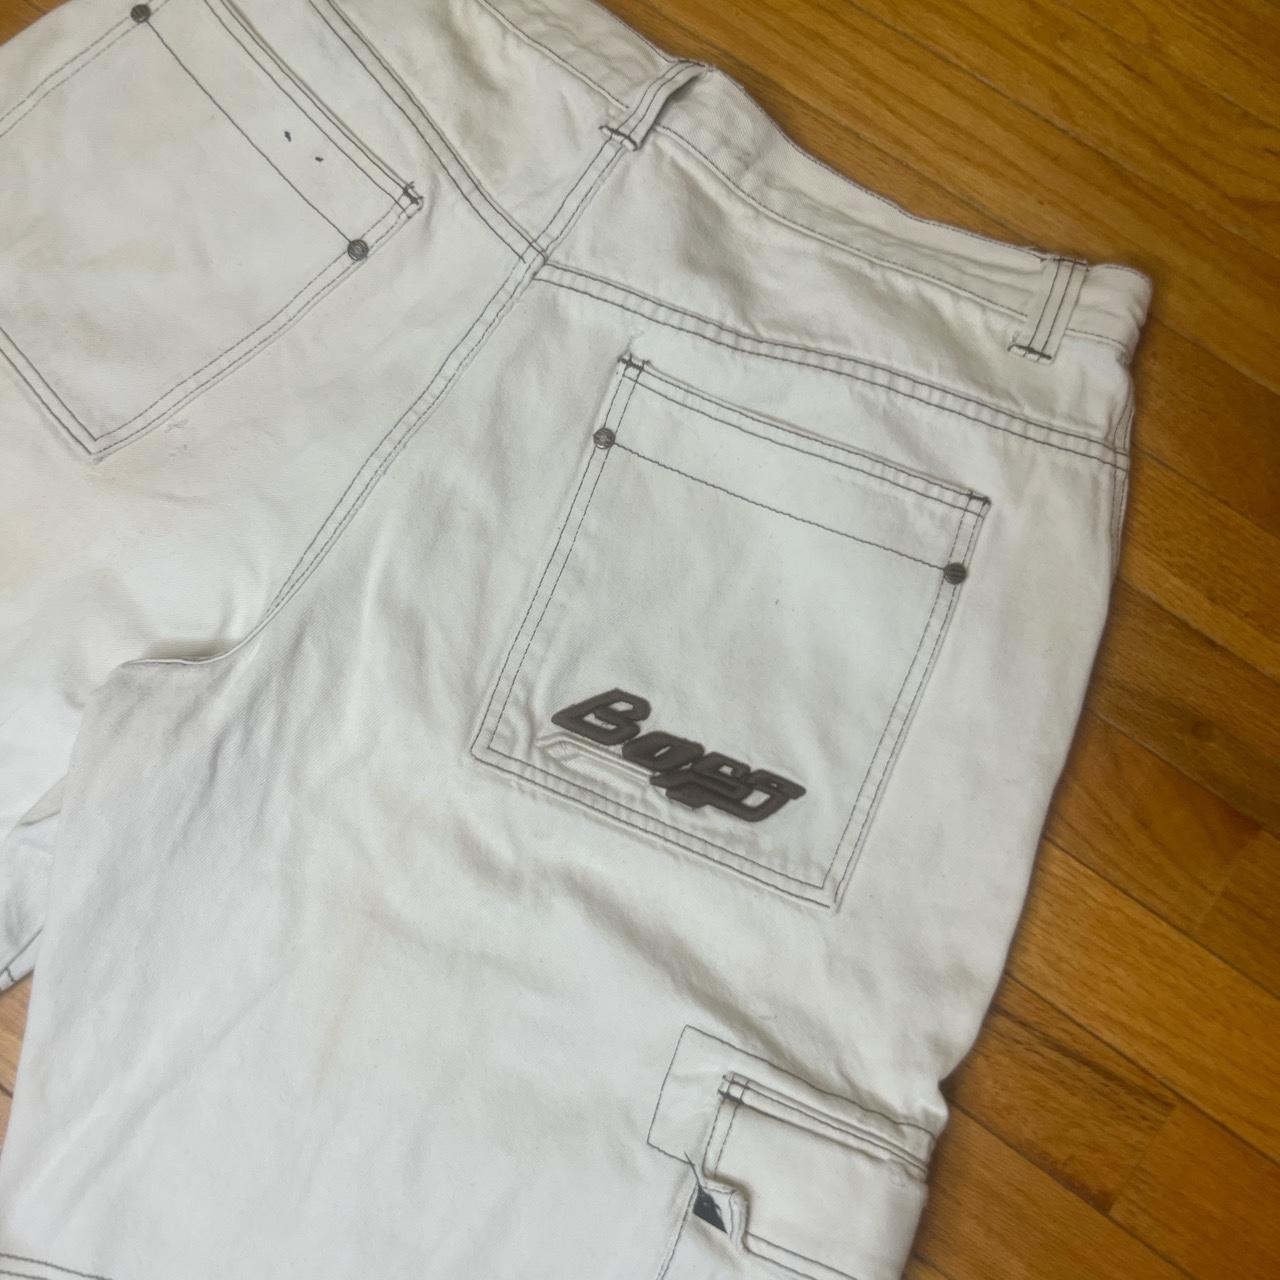 BAGGY JNCO STYLE BOSS CARPENTER SHORTS SIZE 38 FREE... - Depop